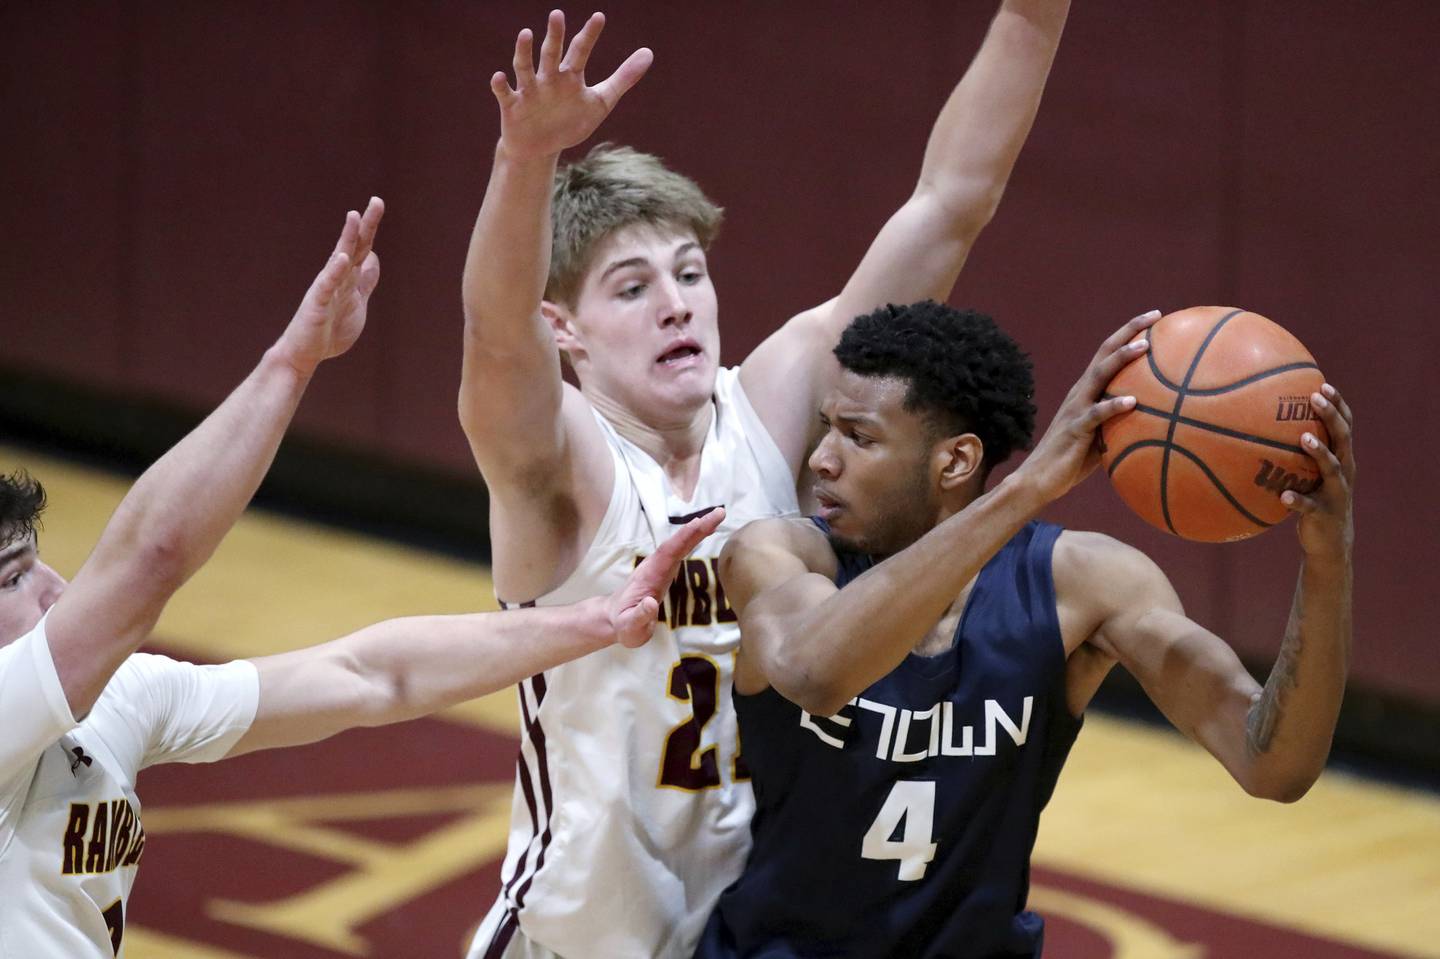 Evanston’s Prince Adams, right, gets double-teamed by Loyola’s Brendan Loftus, center, and Oliver Bishop during a game in Wilmette on Friday, Dec. 16, 2022.  